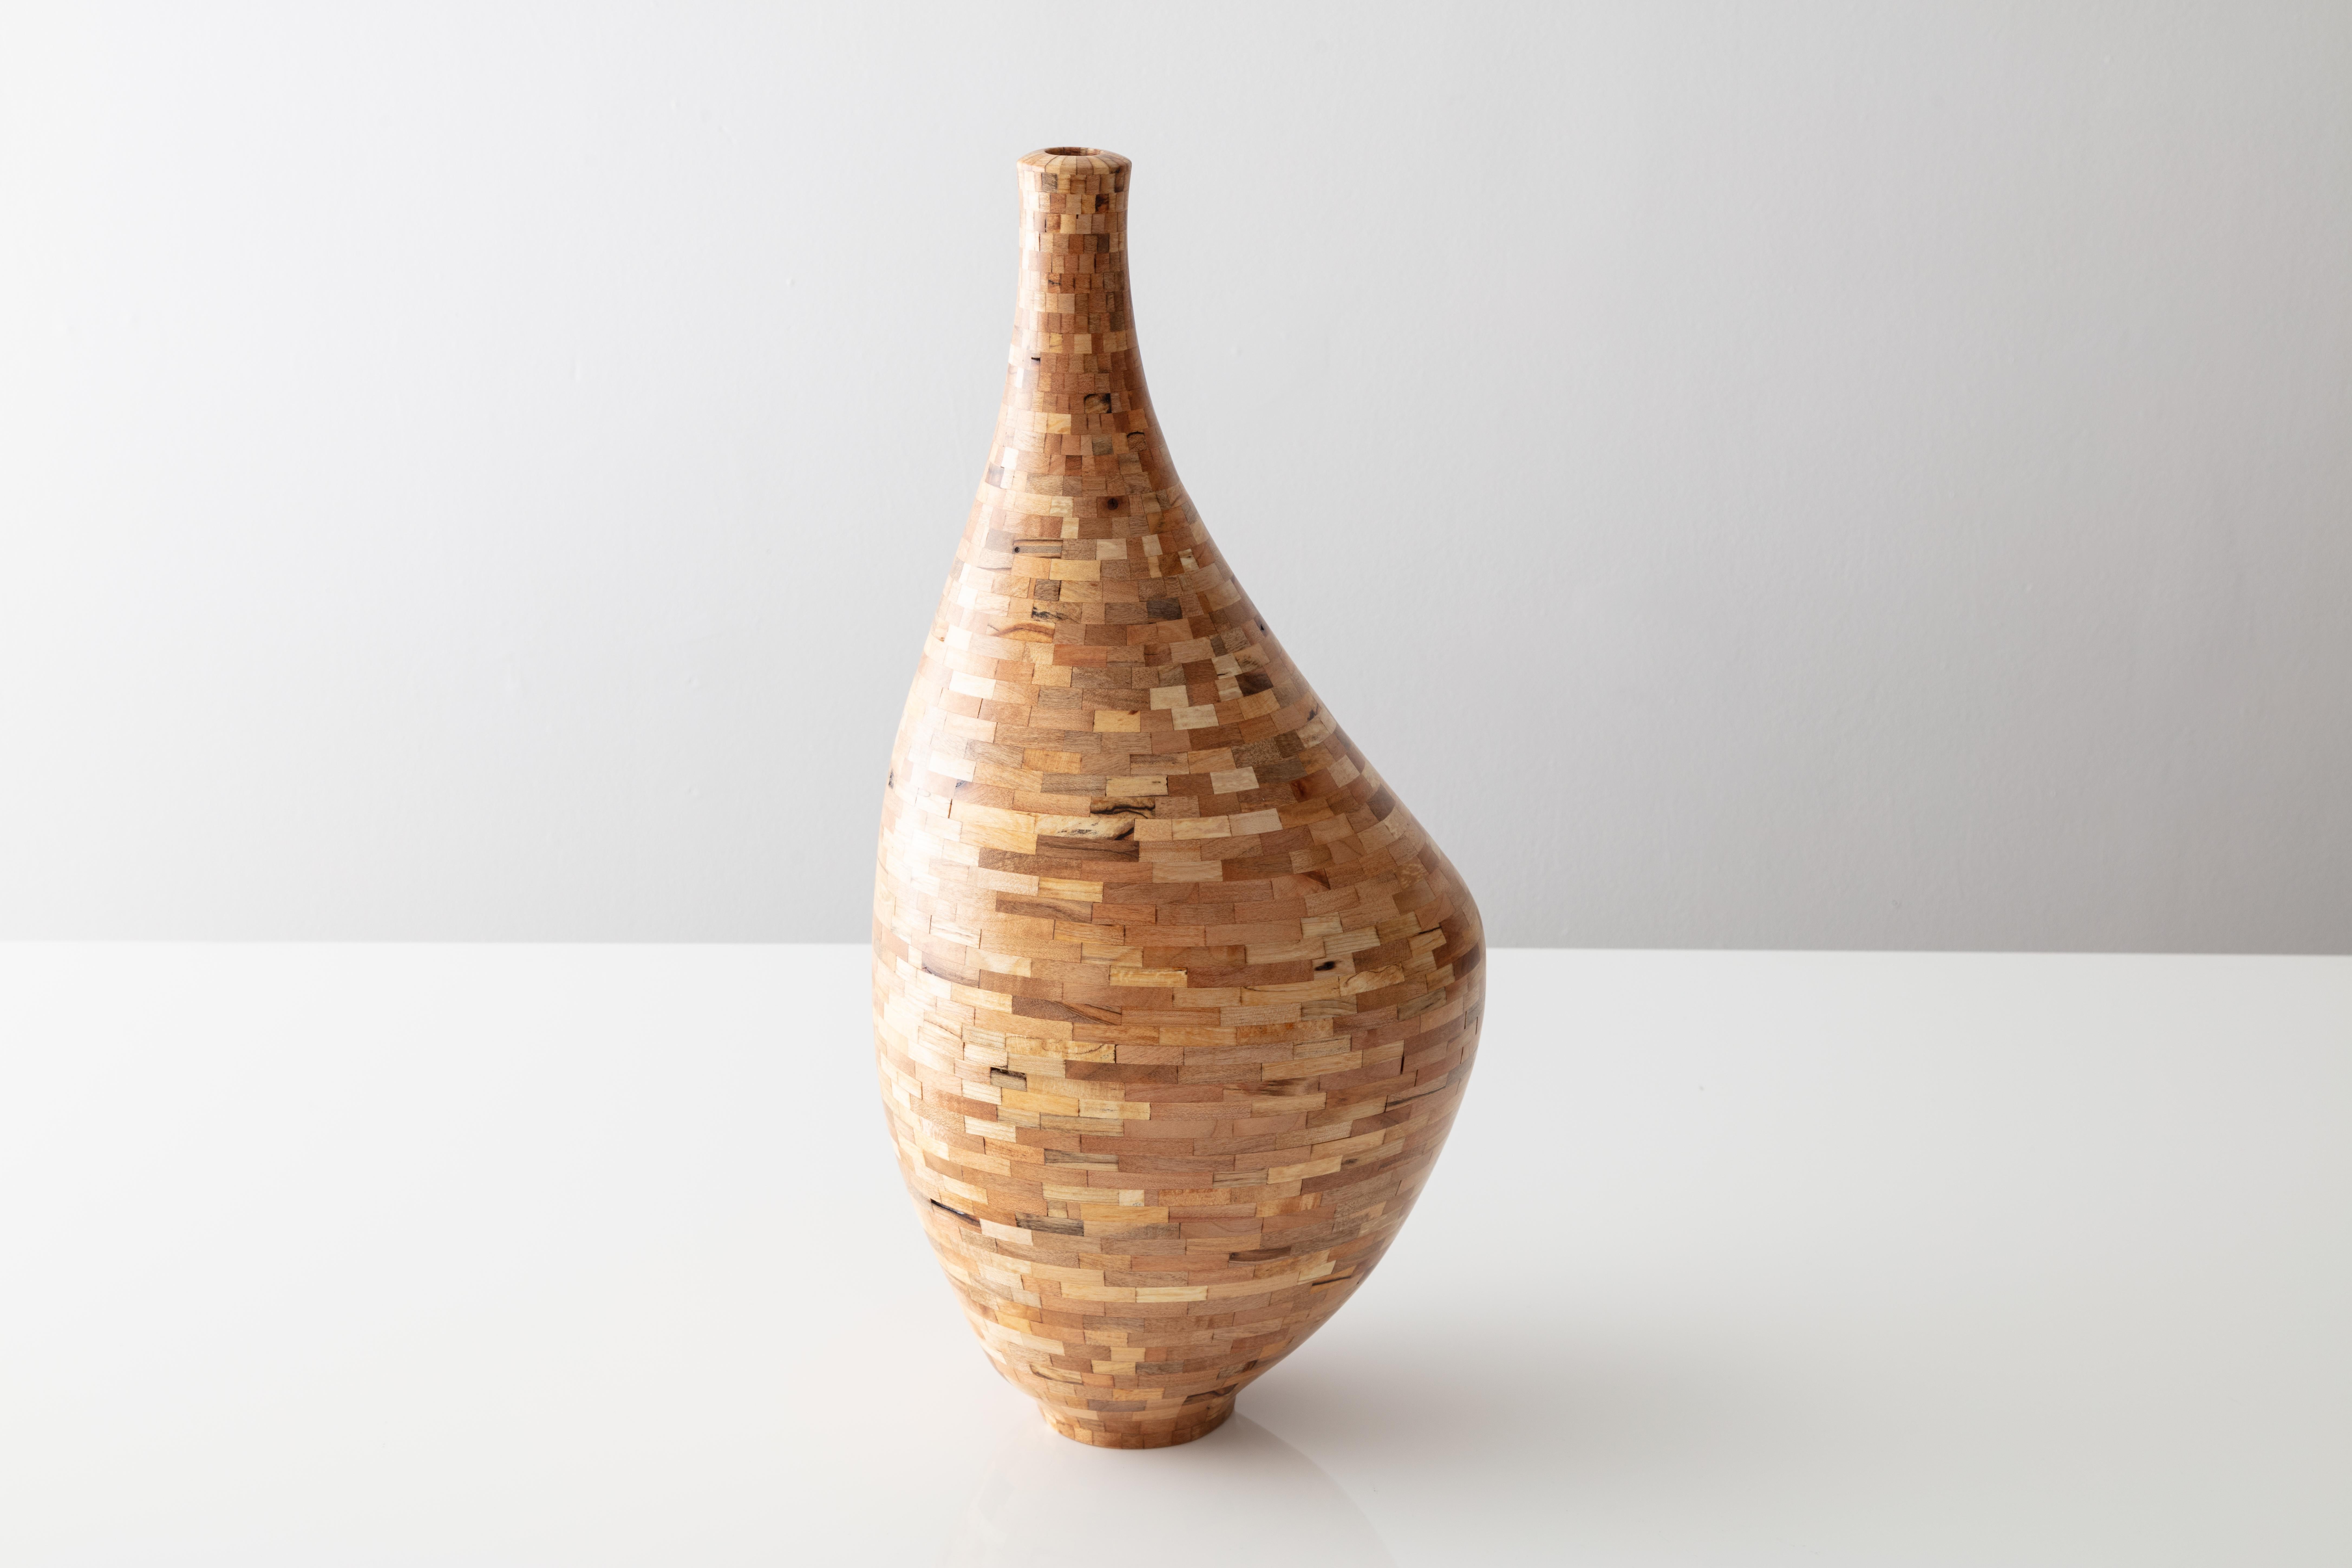 Modern Contemporary Spalted Maple  Goose Neck Vase #2 by Richard Haining Available Now